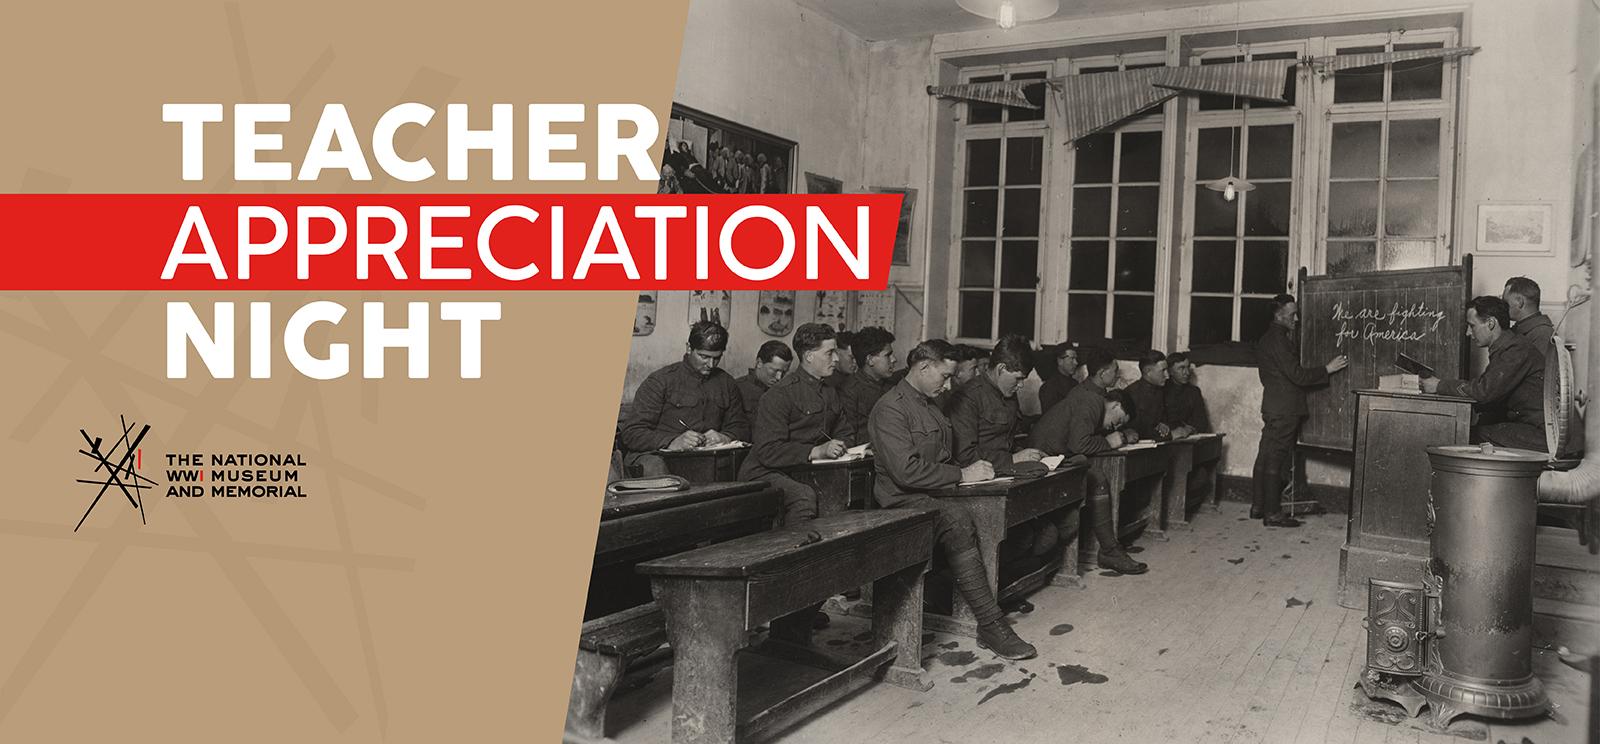 Image: Black and white photograph of WWI soldiers in a classroom with several instructors at the front near a chalkboard. Text: 'Teacher Appreciation Night'